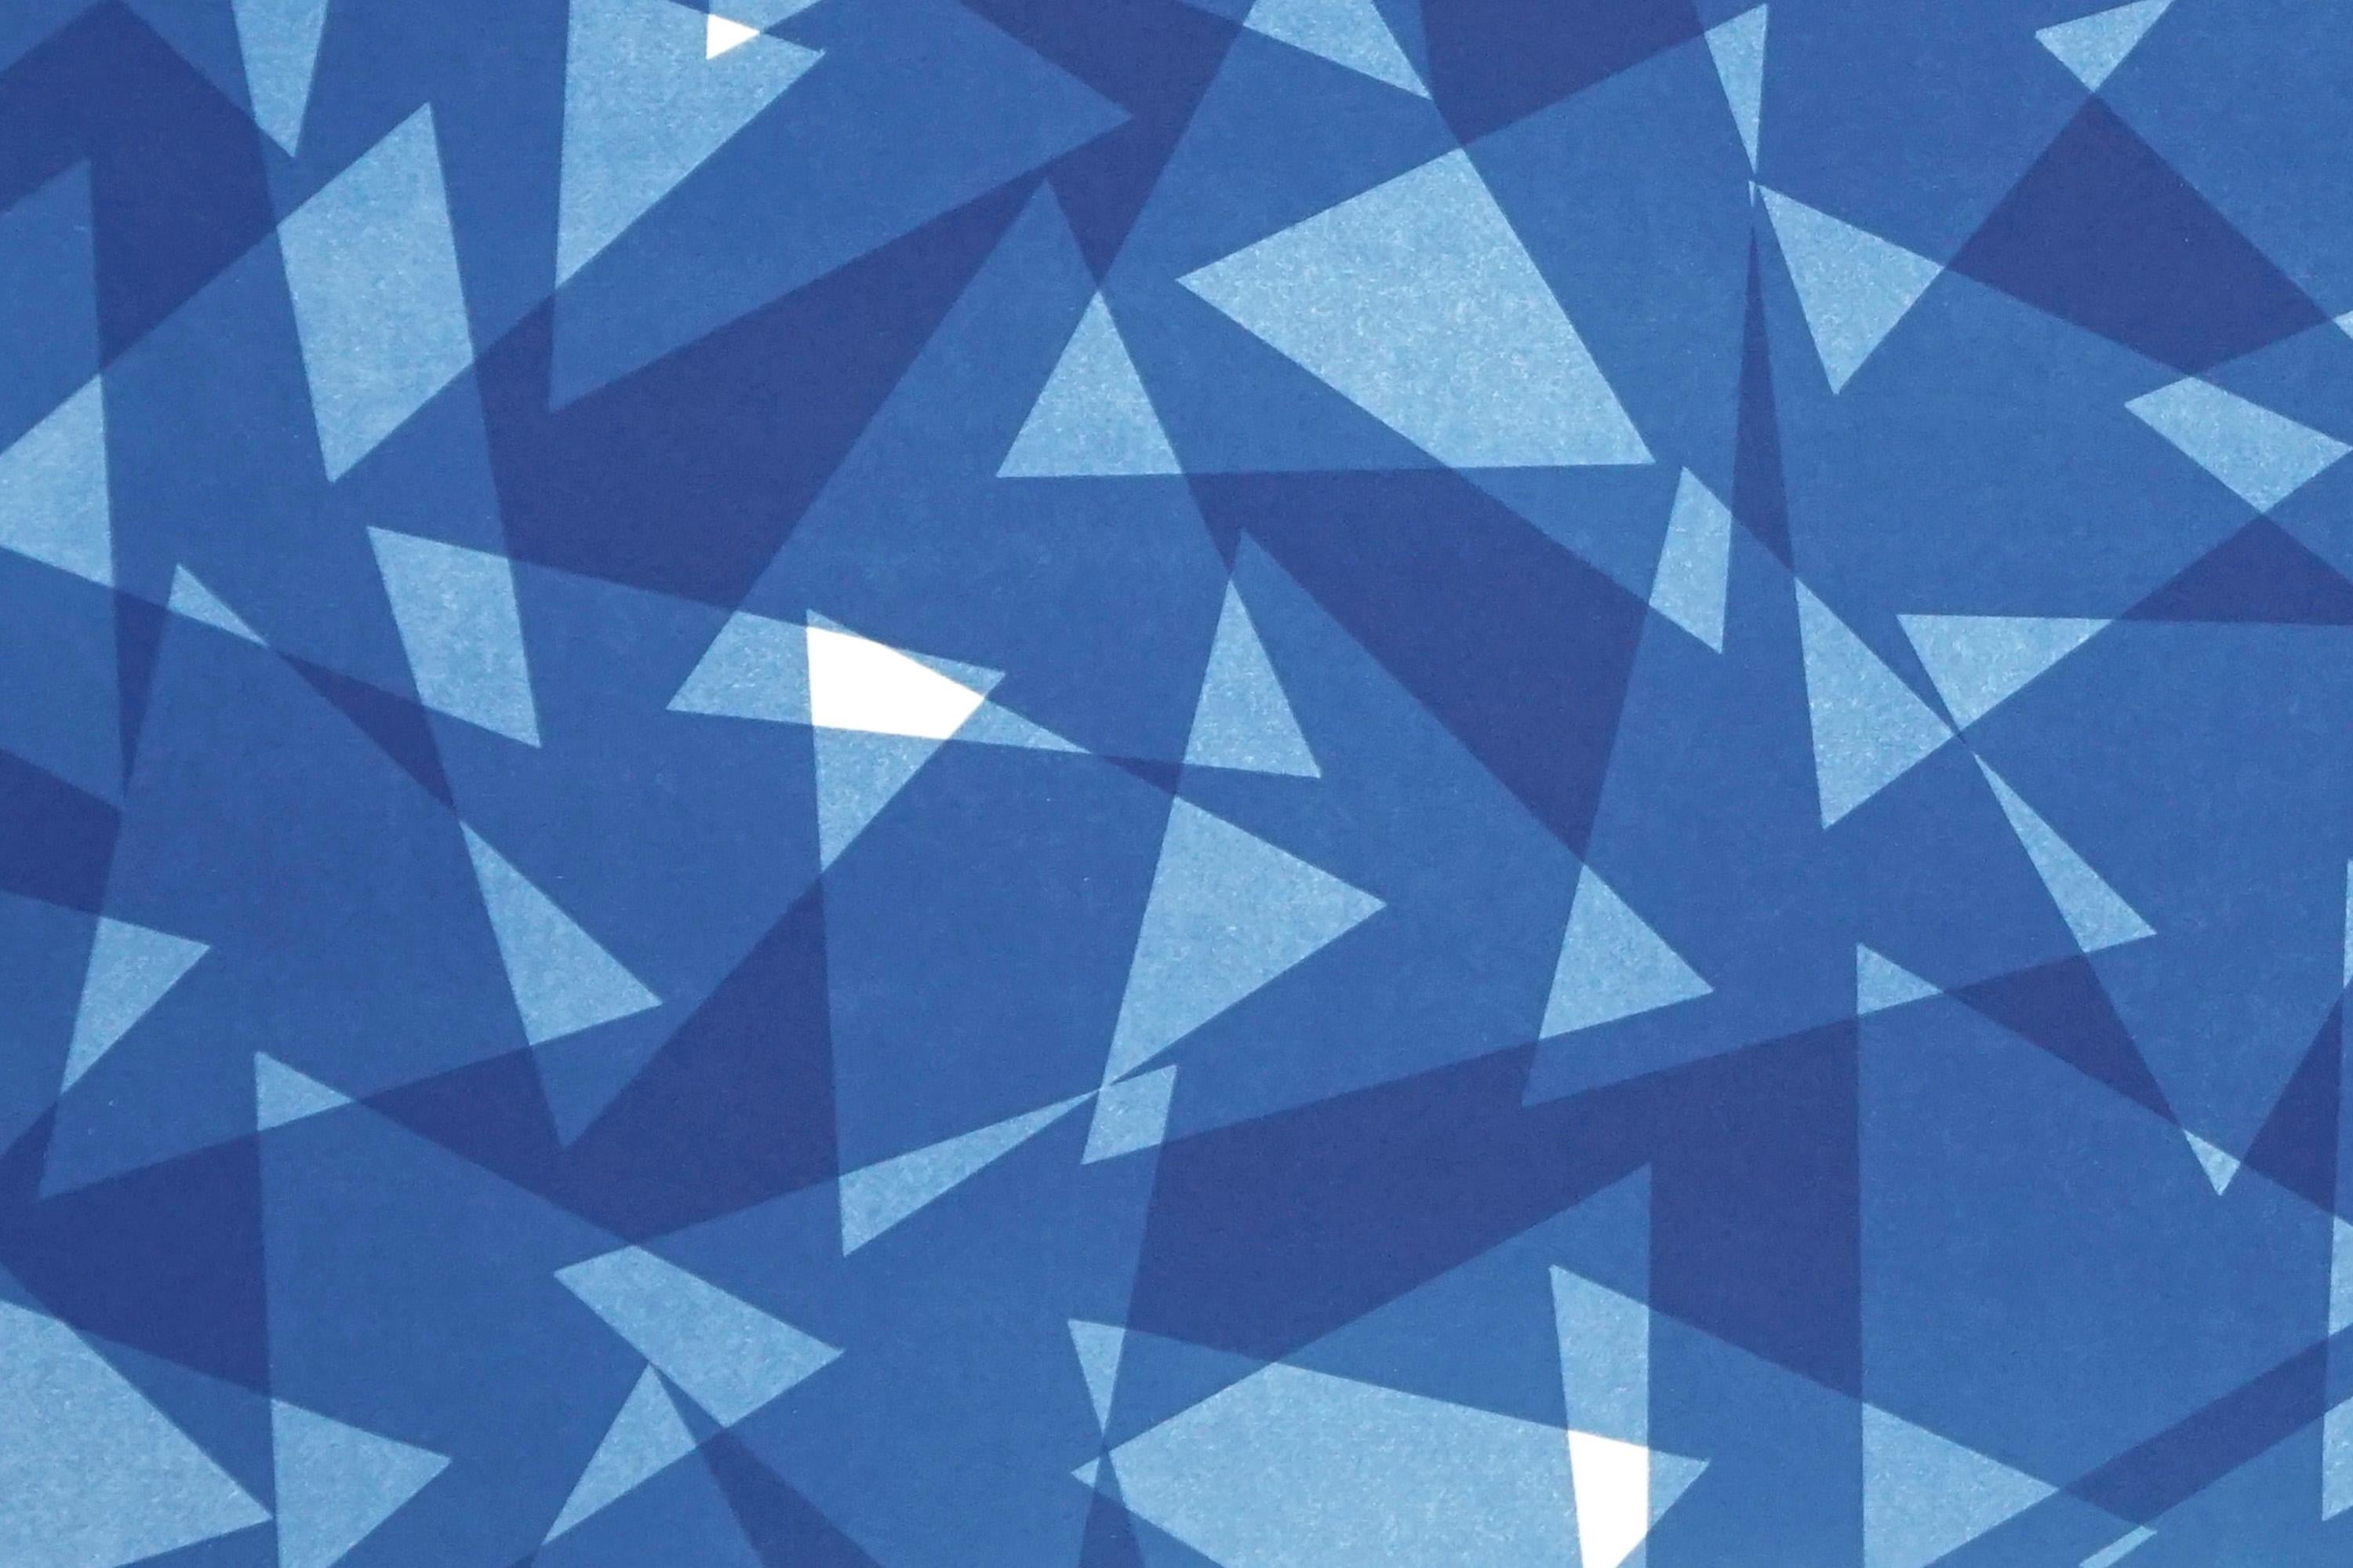 This is an exclusive handprinted unique cyanotype that takes its inspiration from the mid-century modern shapes.
It's made by layering paper cutouts and different exposures using uv-light. 

Details:
+ Title: Transparent Layered Triangles I
+ Year: